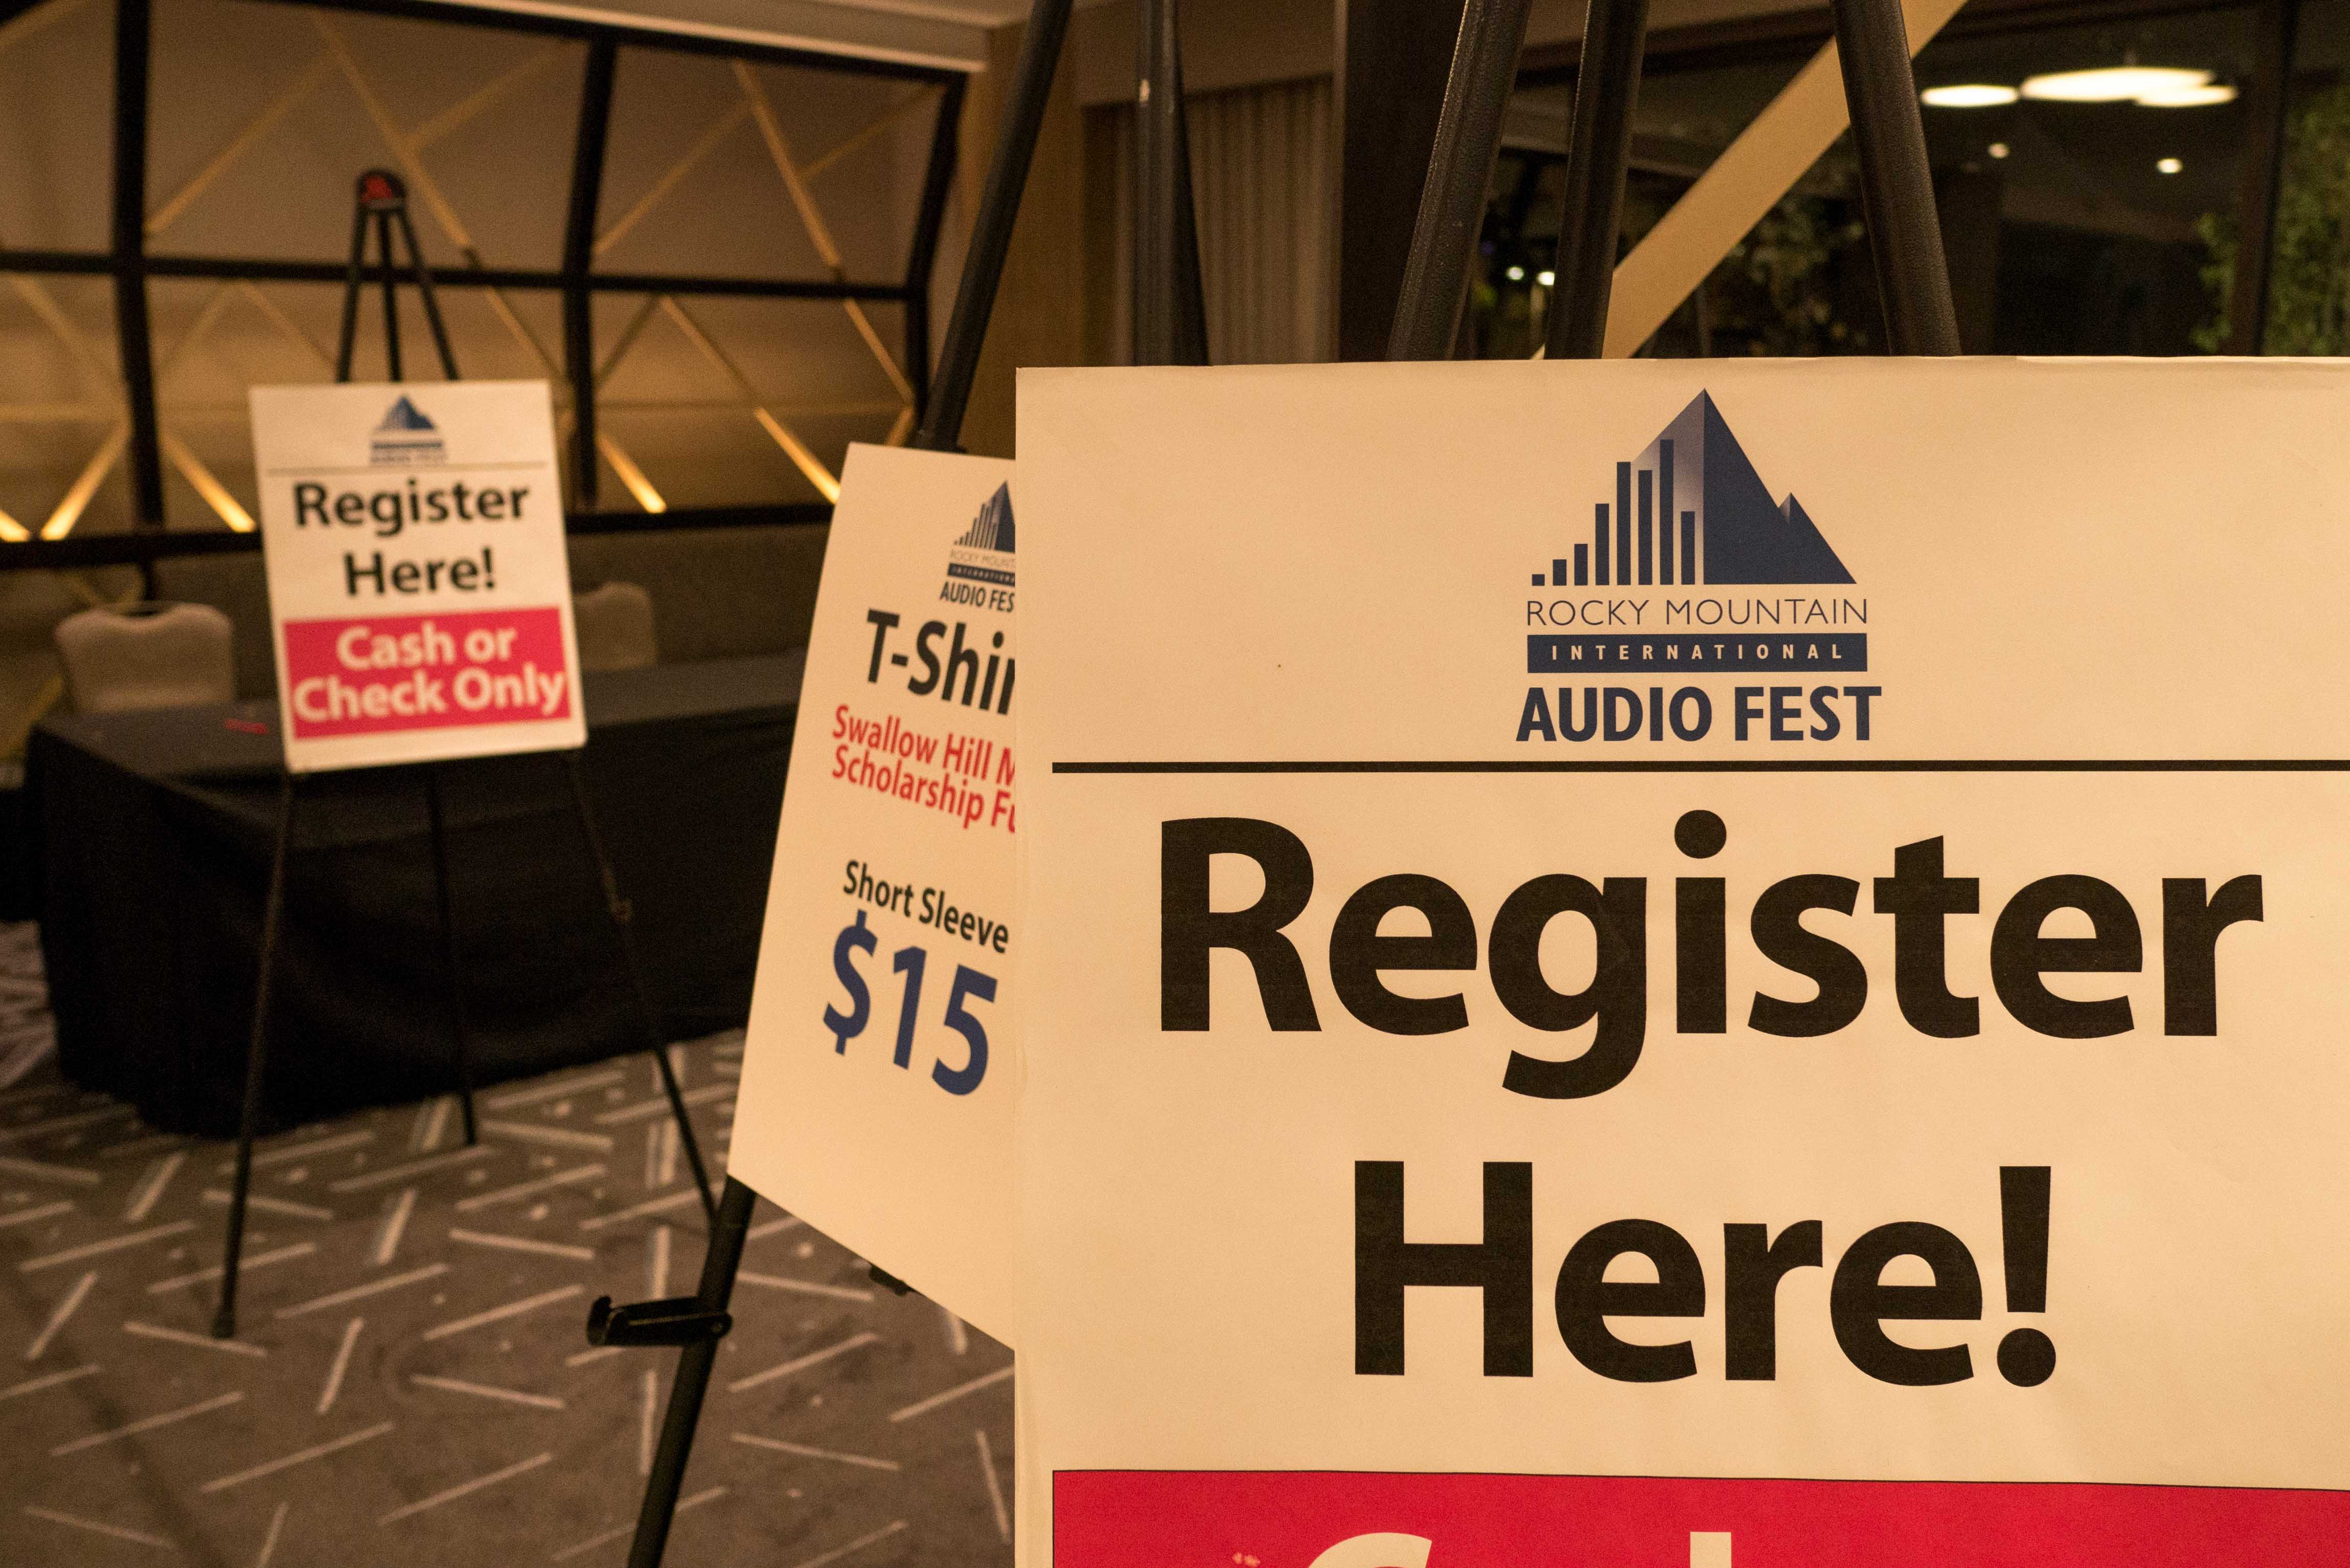 http://audiophilereview.com/images/rmaf2016-2-small-2.jpg